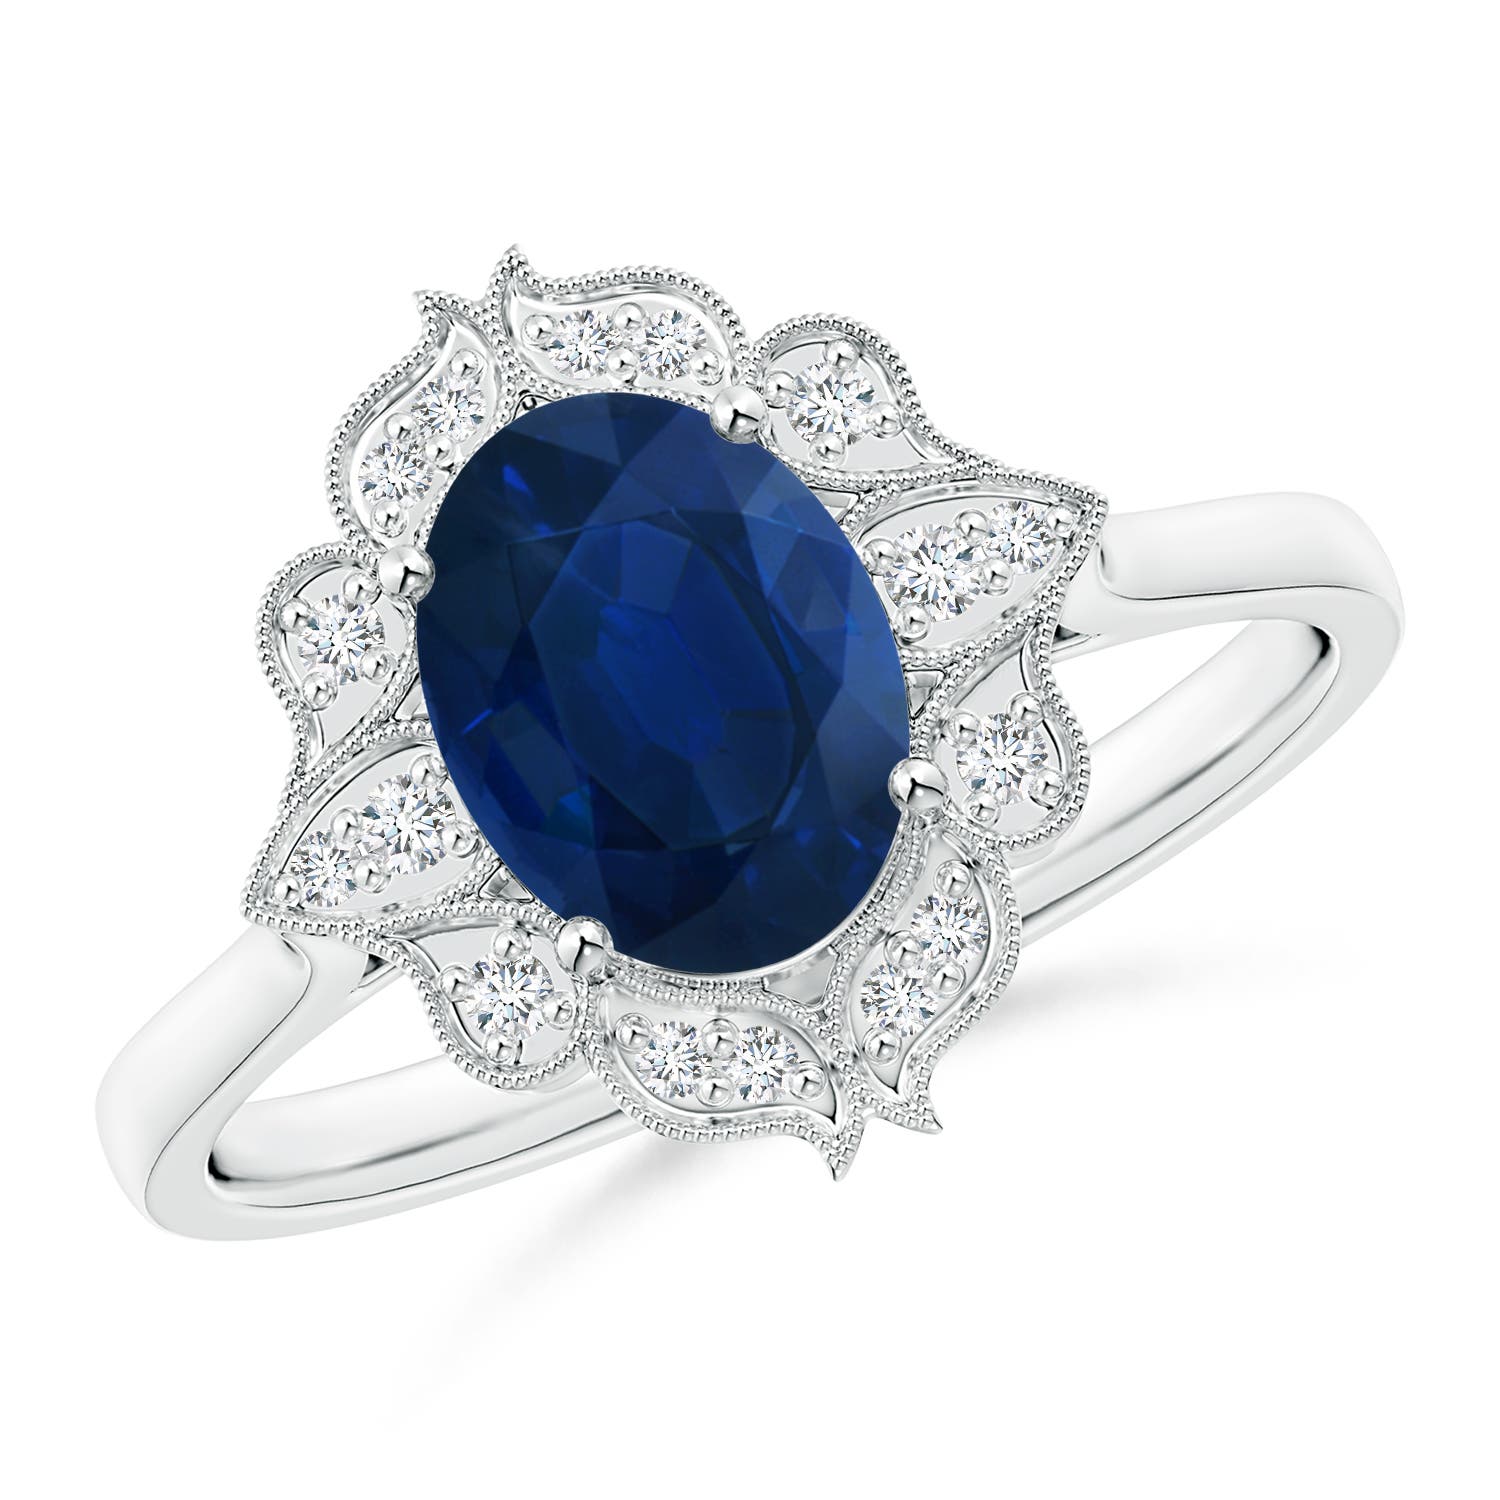 AA - Blue Sapphire / 1.65 CT / 14 KT White Gold